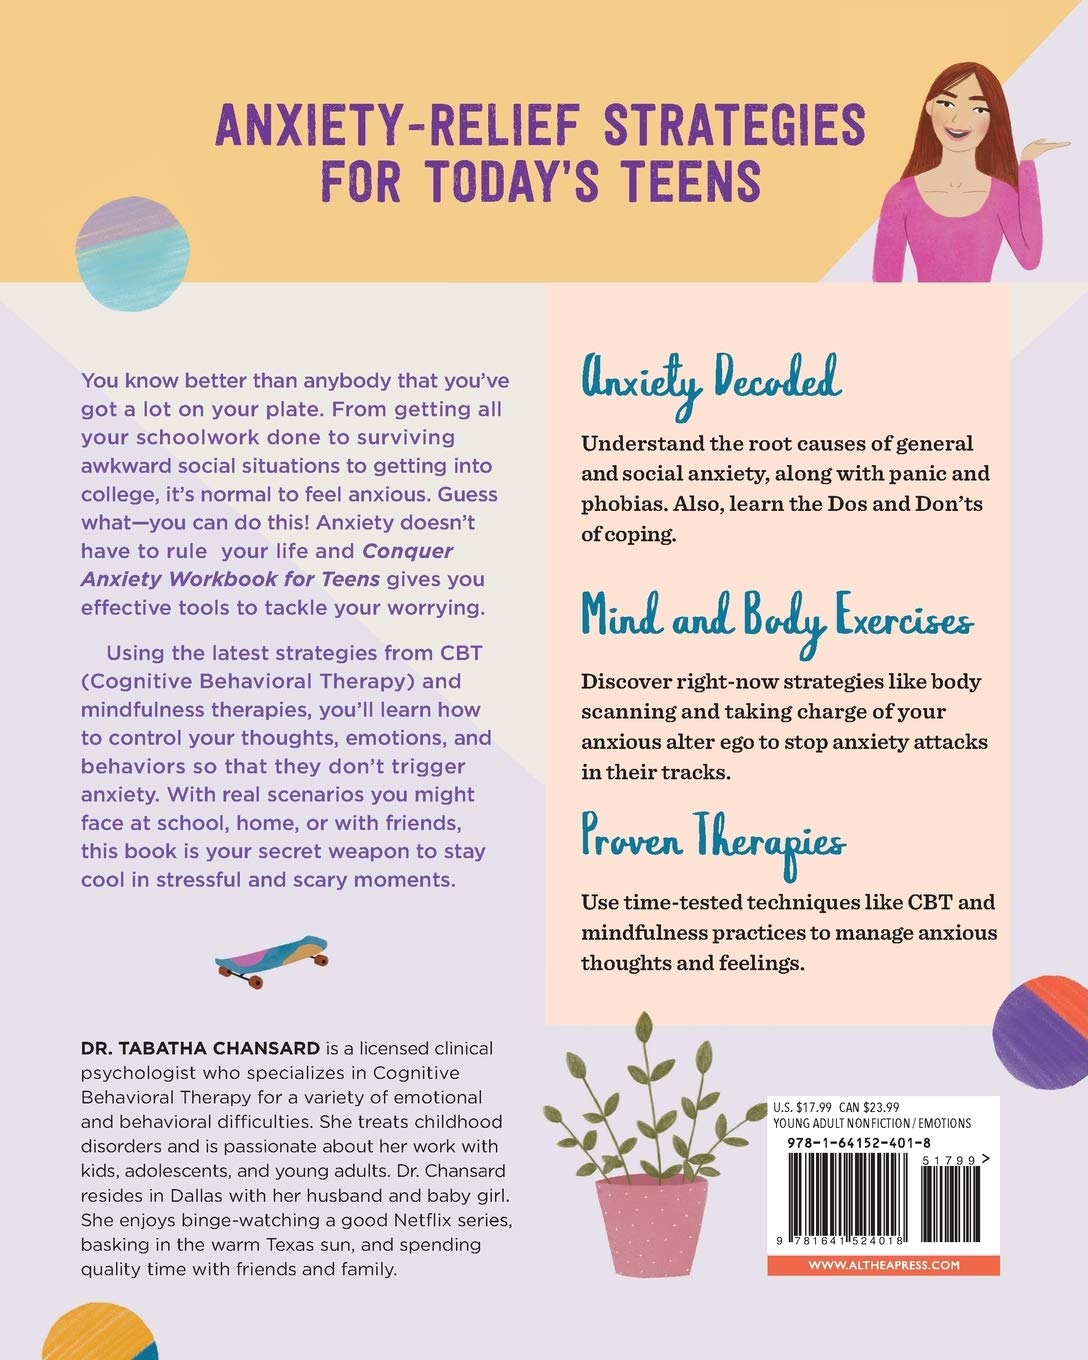 Conquer Anxiety Workbook for Teens: Find Peace from Worry, Panic, Fear, and Phobias (Spiral Bound)